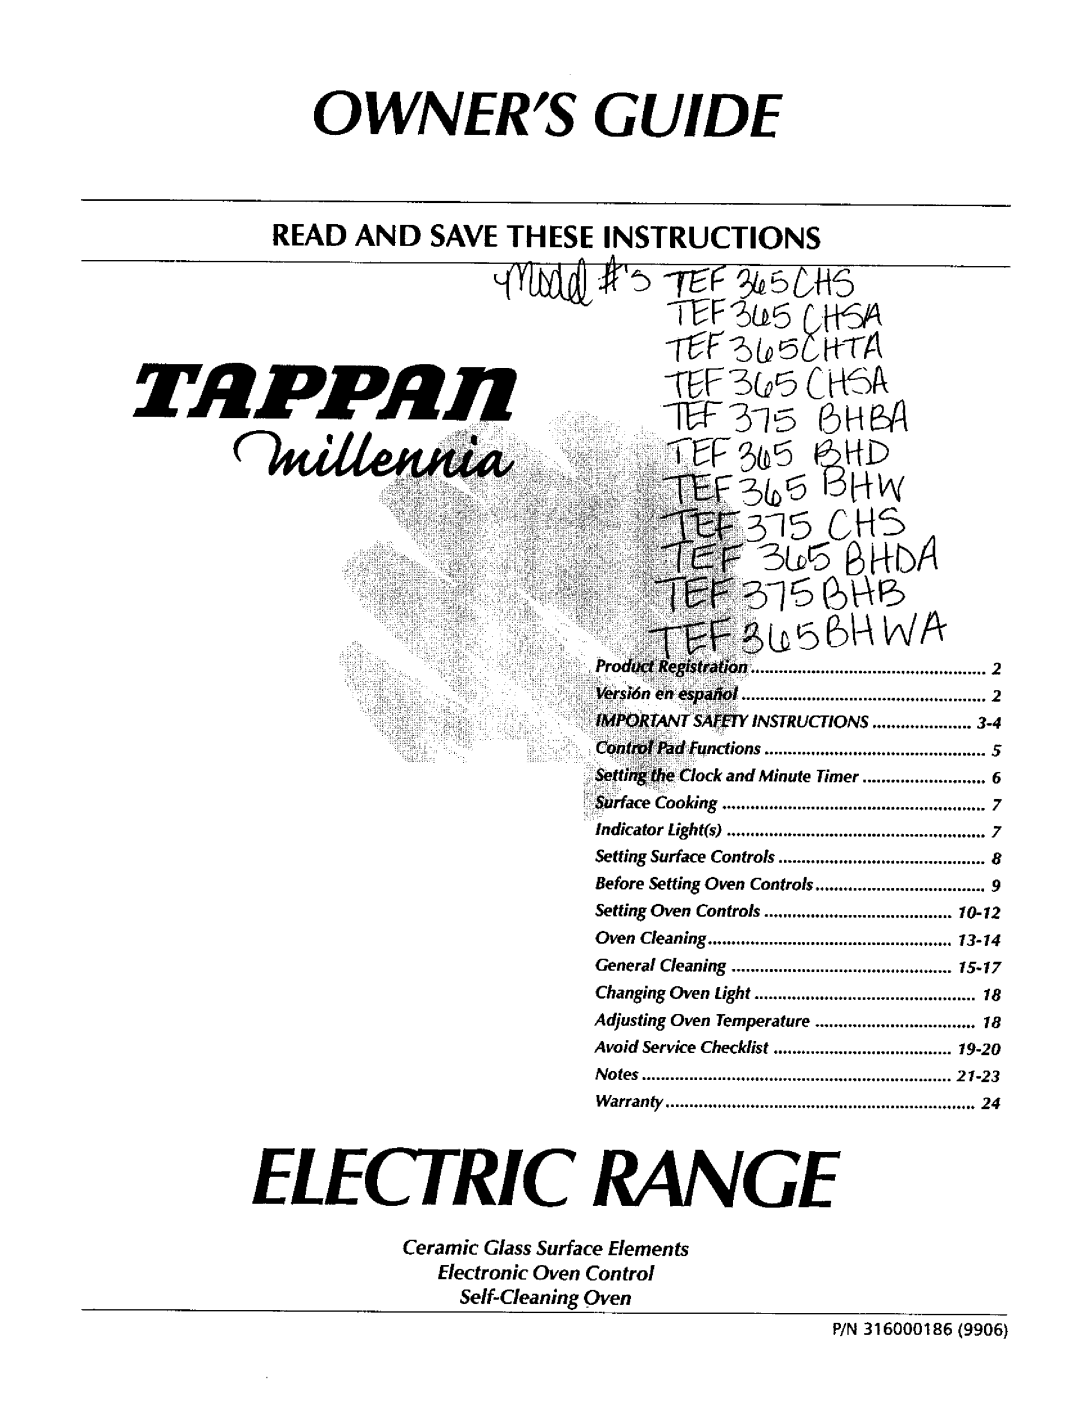 Tappan TEF365CHS warranty Read And Save These Instructions, linute Timer, Ceramic Glass Surface Elements, Electric Range 